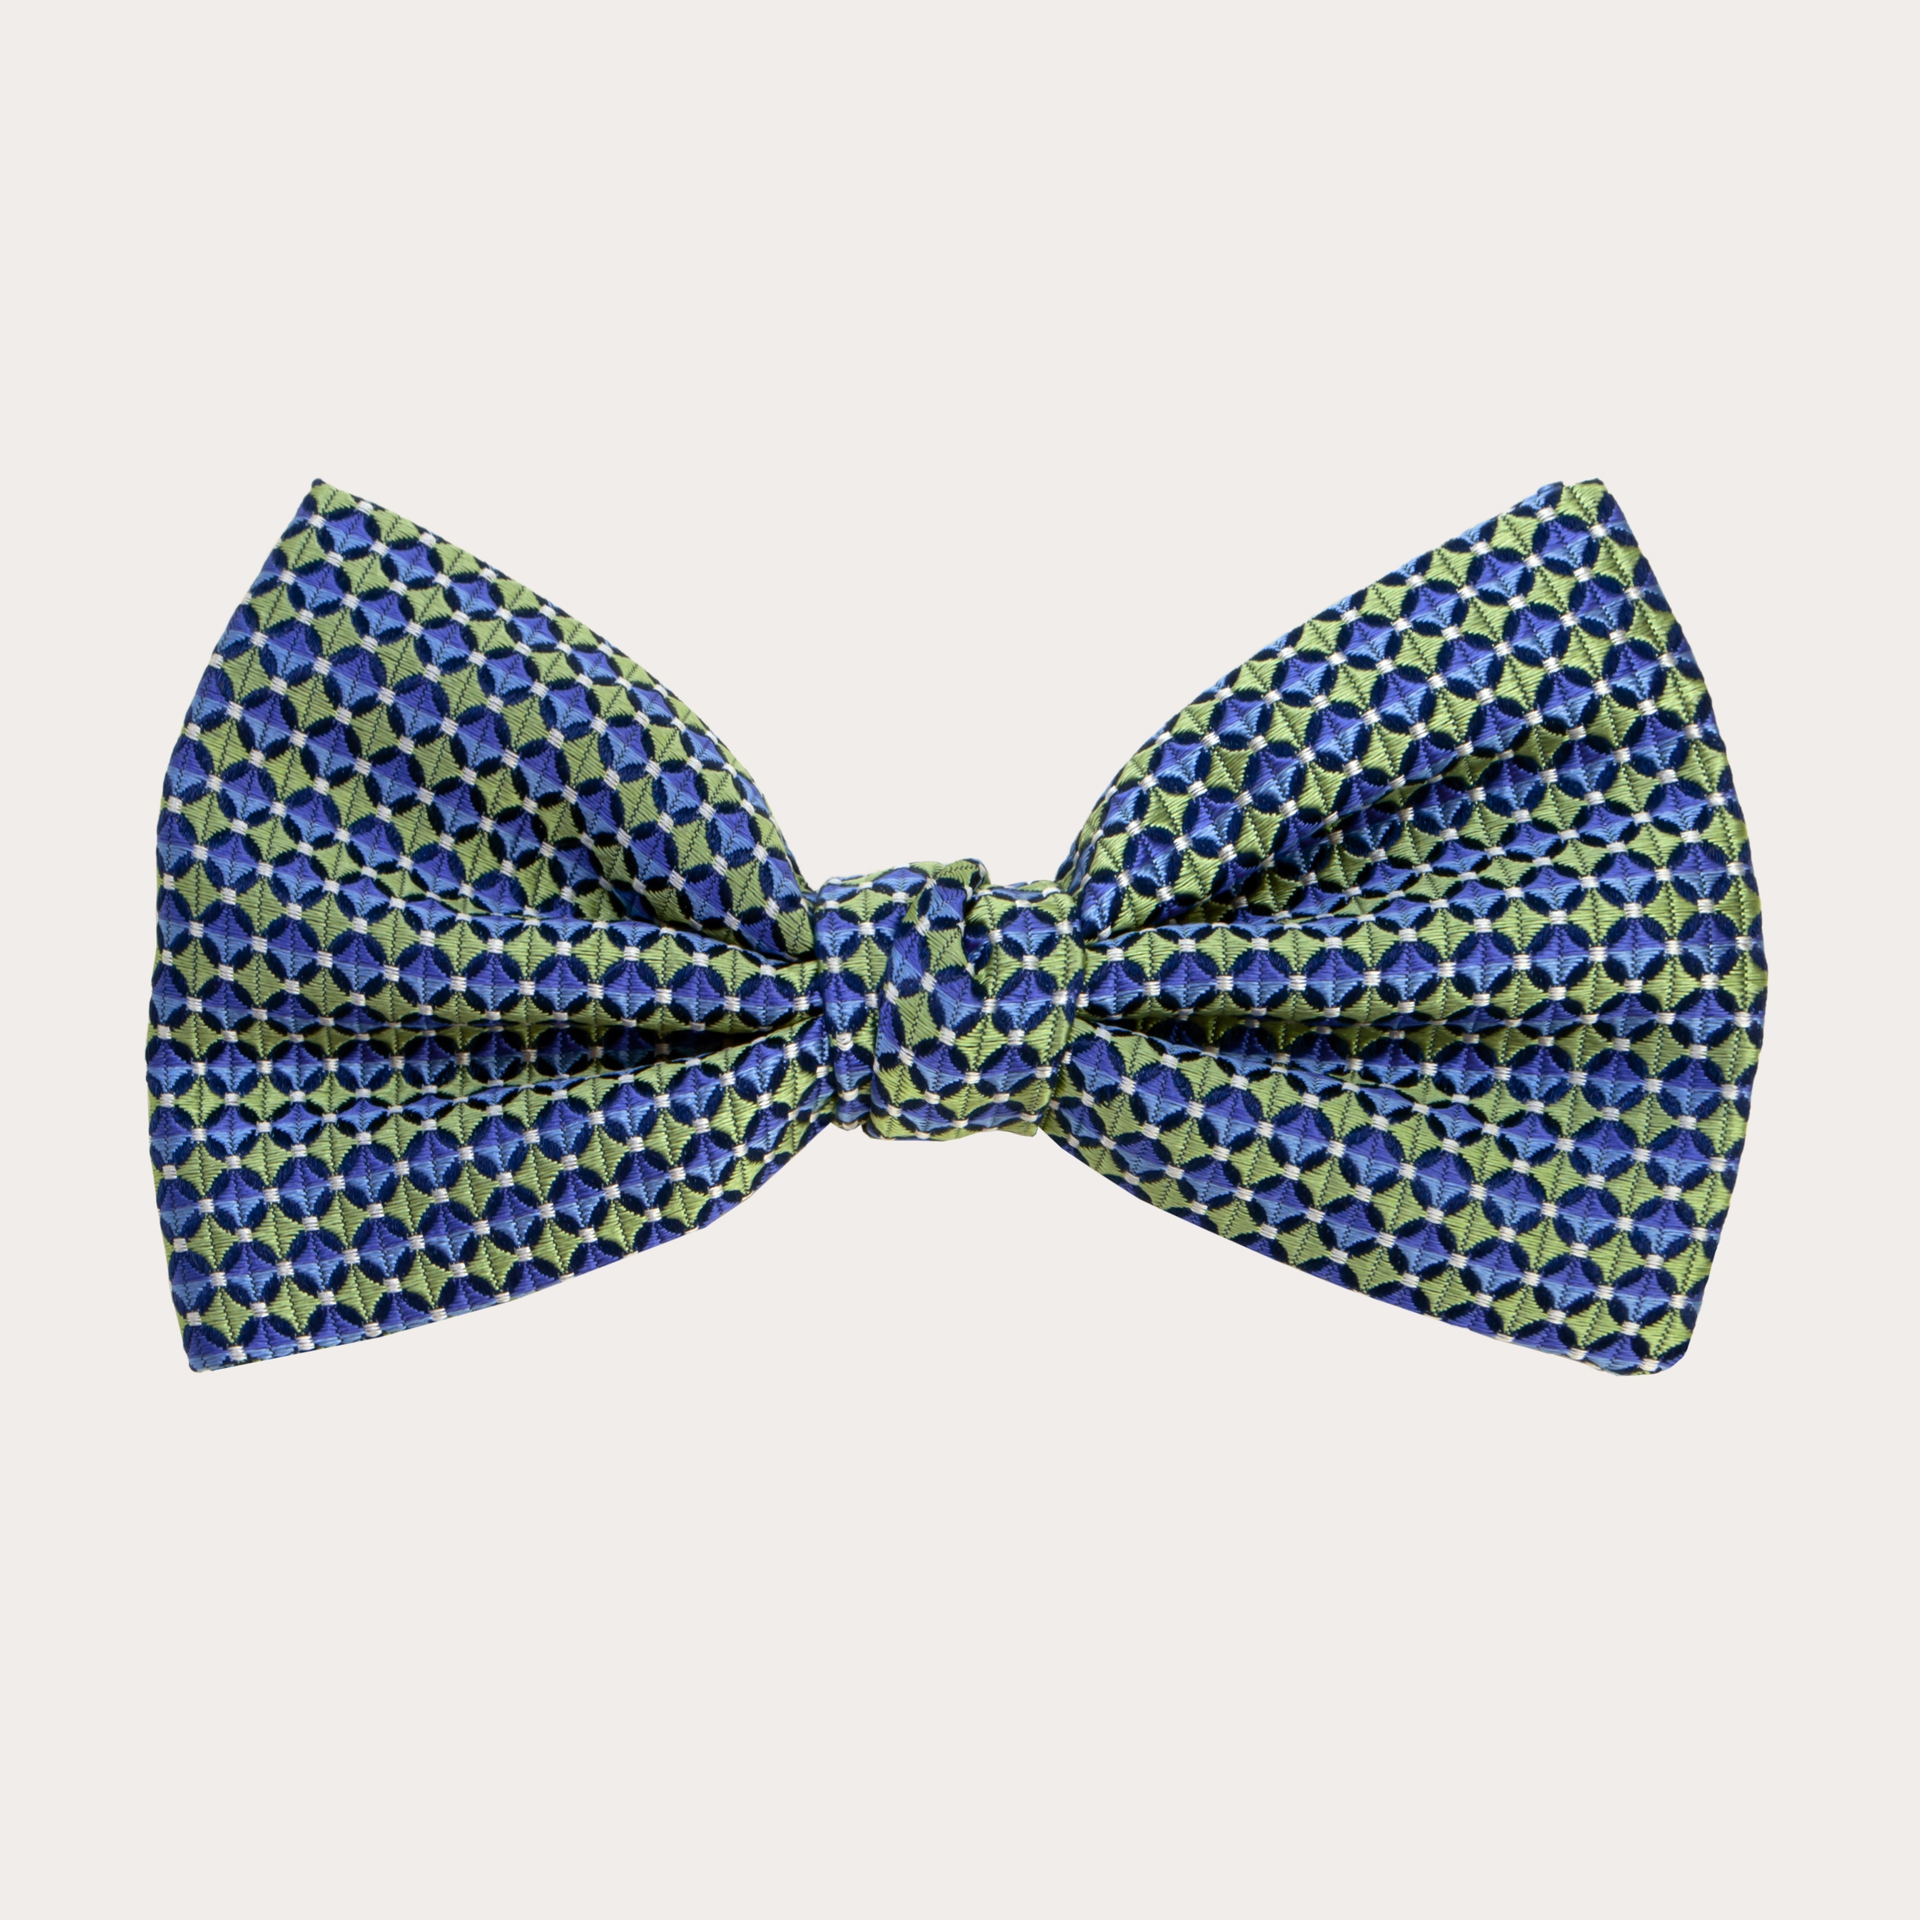 Silk pre-tied bow tie, light blue with squares pattern